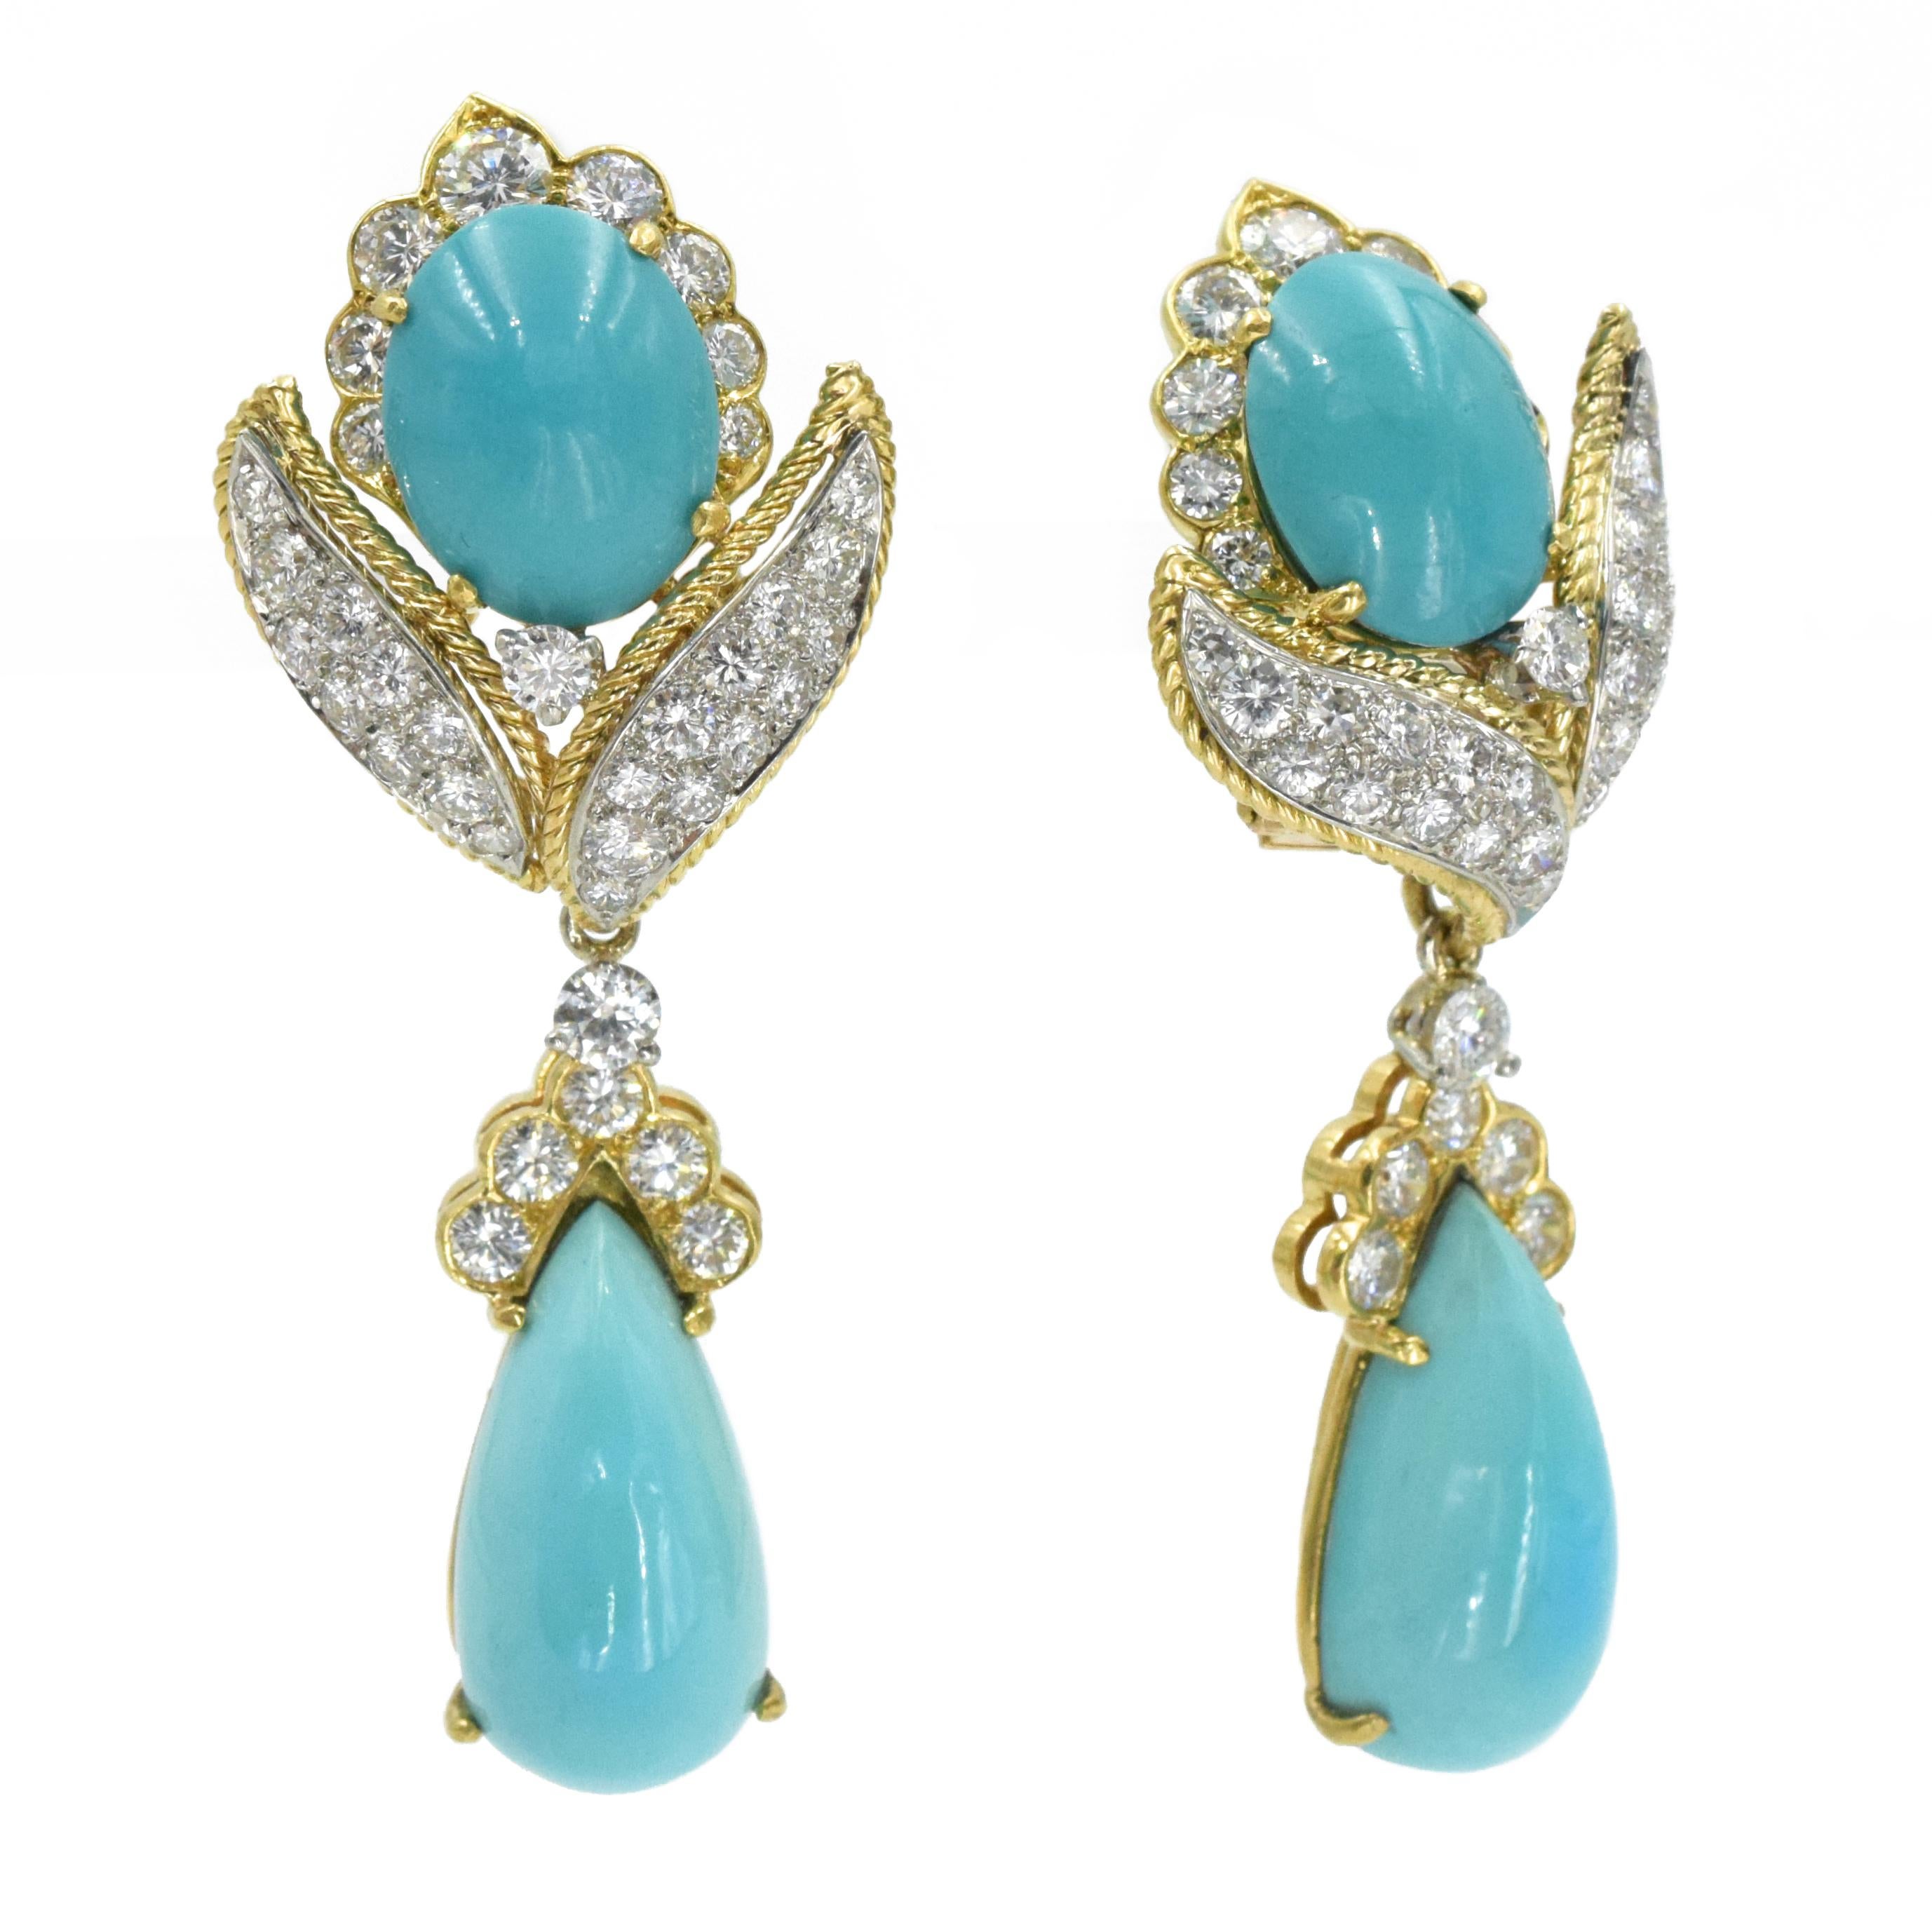 VCA Turquoise and Diamond Earrings In Yellow Gold With Removable Drops. Set with 74 brilliant
round brilliant and single cut diamonds with an approximate weight of 3.4carats, color:F/G, clarity: VS.
Consisting of two oval turquoise cabachos (13mm x